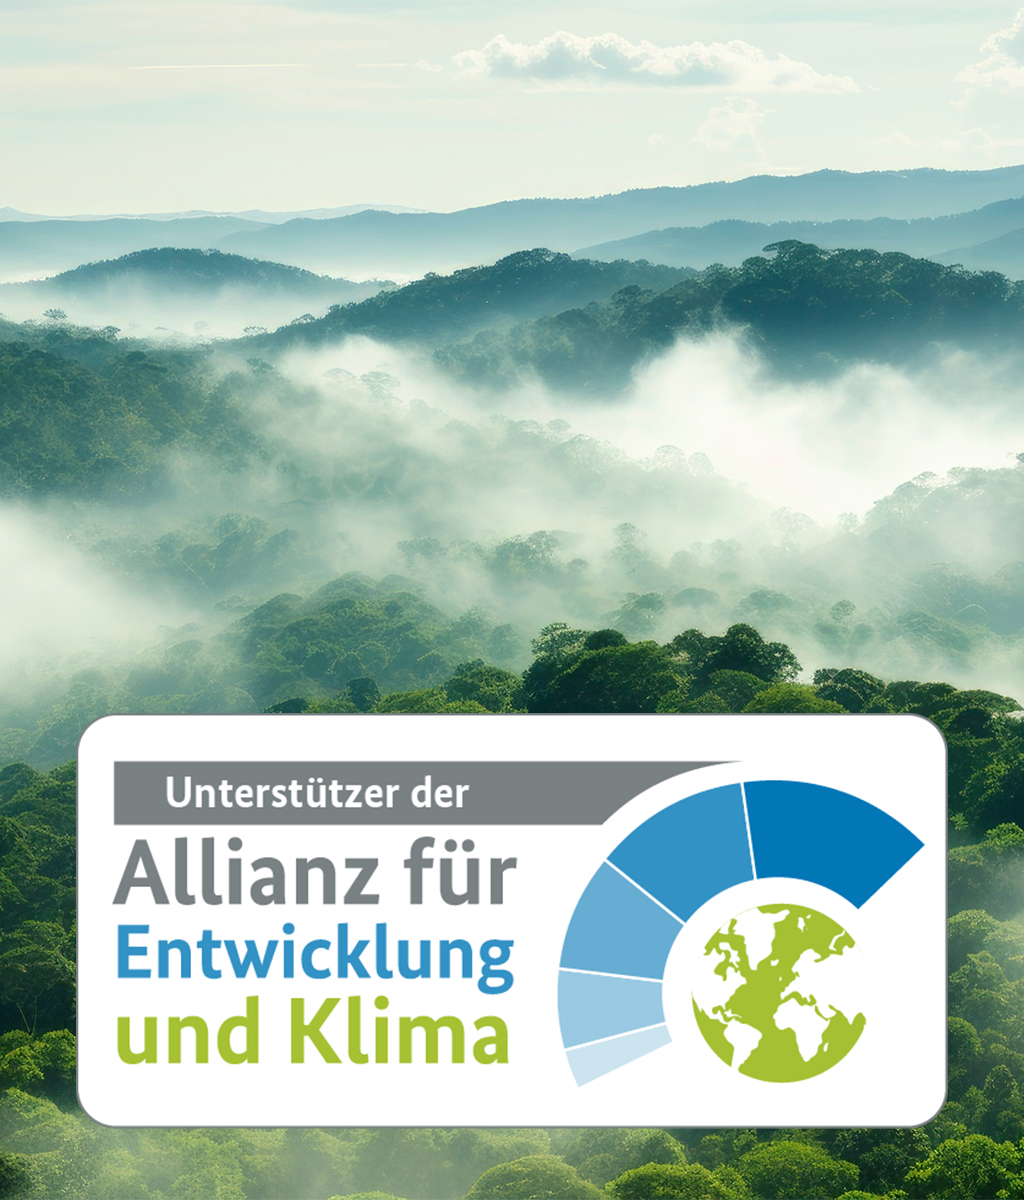 The Alliance for Development and Climate